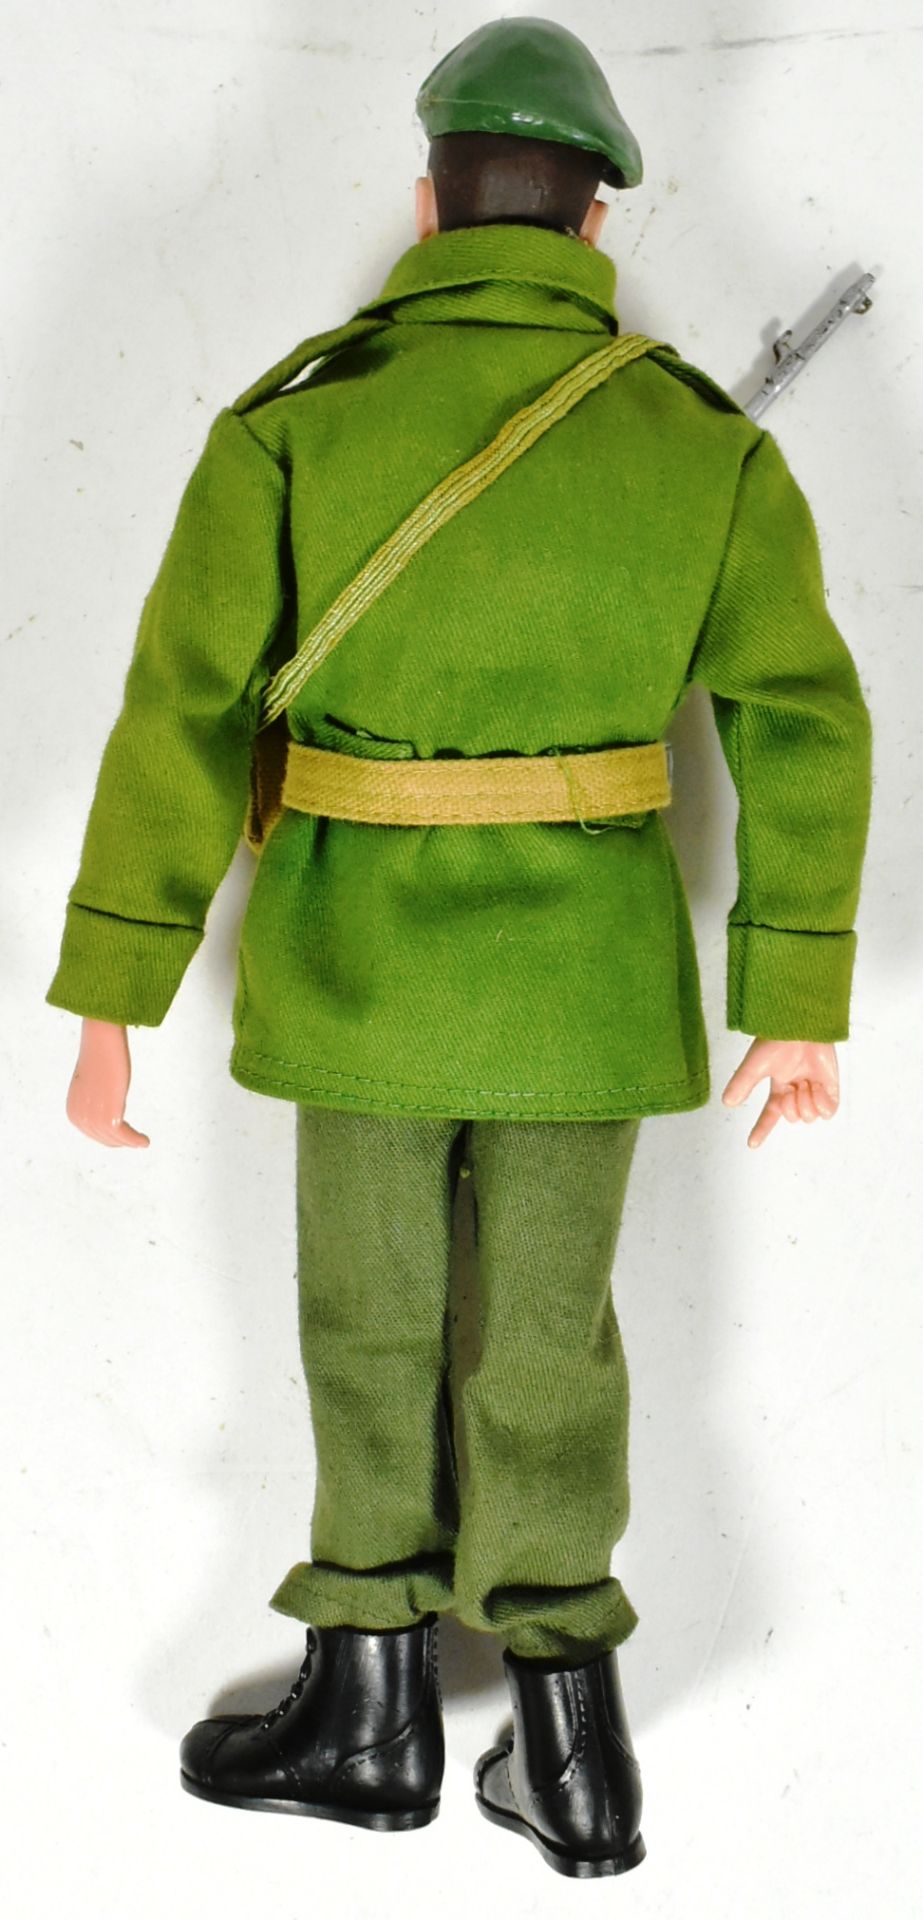 ACTION MAN - VINTAGE PALITOY TALKING COMMANDER ACTION FIGURE - Image 4 of 5